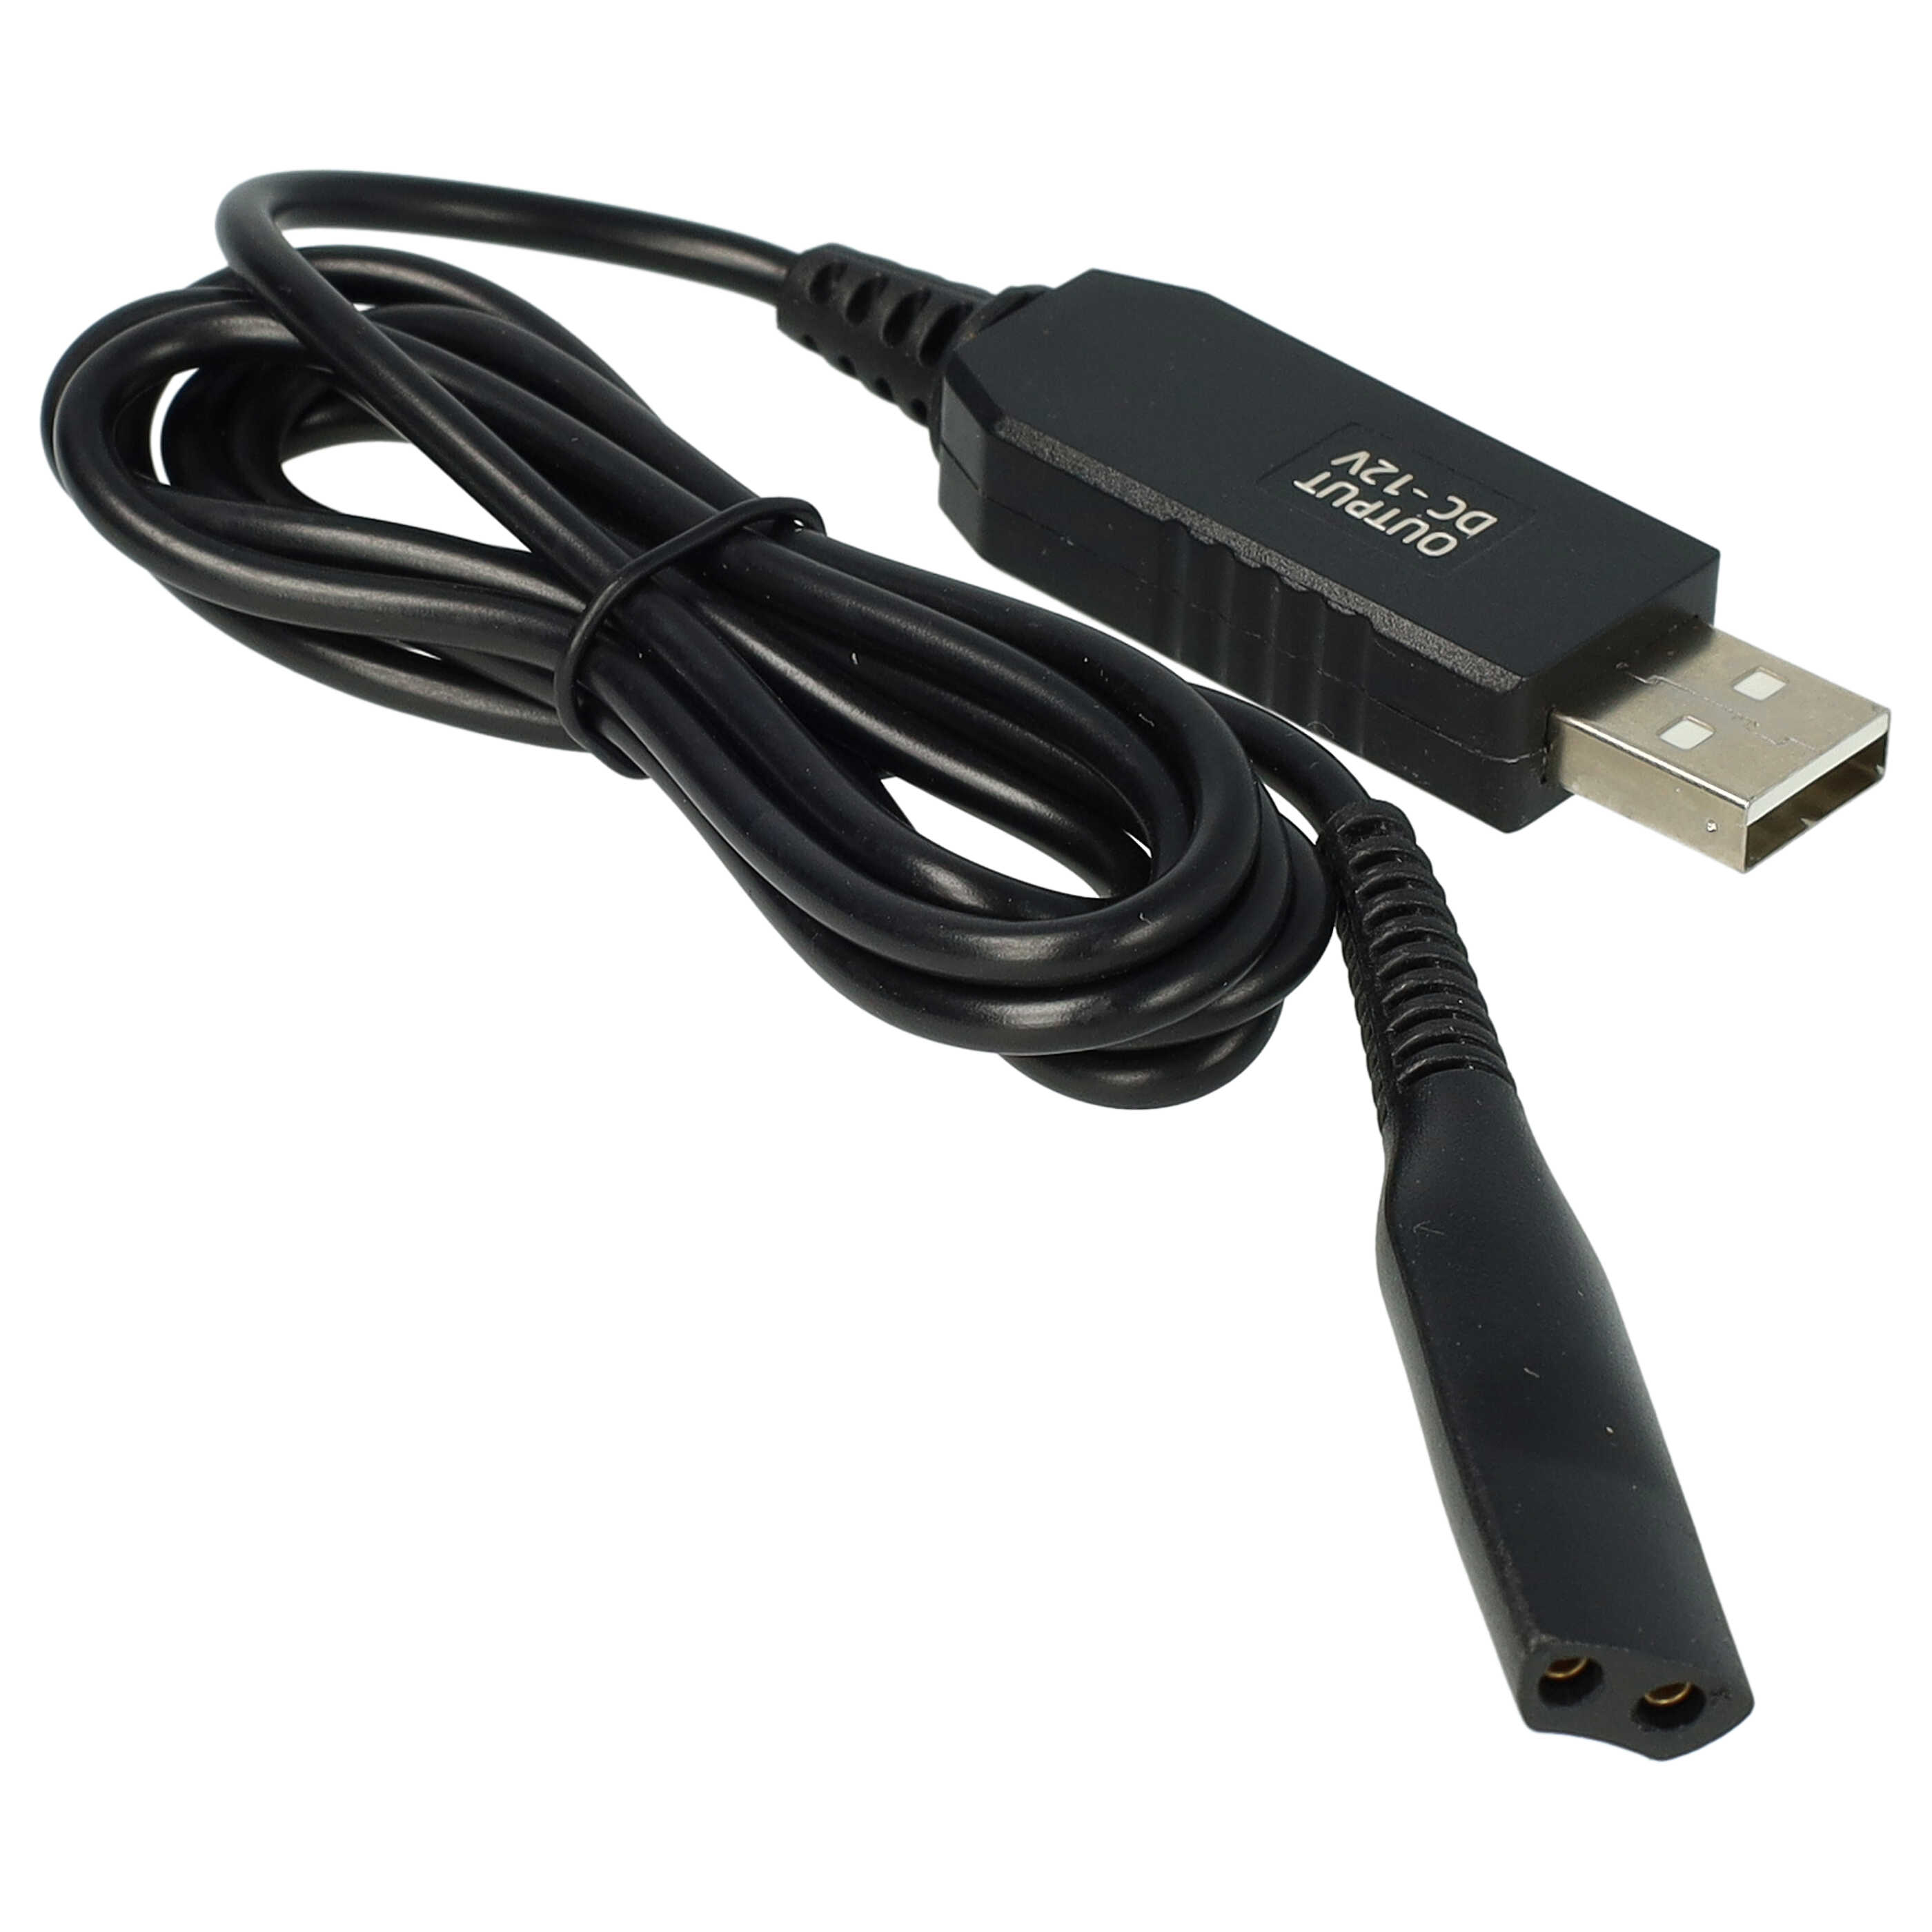 USB Charging Cable suitable for HC20 Braun, Oral-B HC20 Shaver, Epilator, Toothbrush etc. - 120 cm